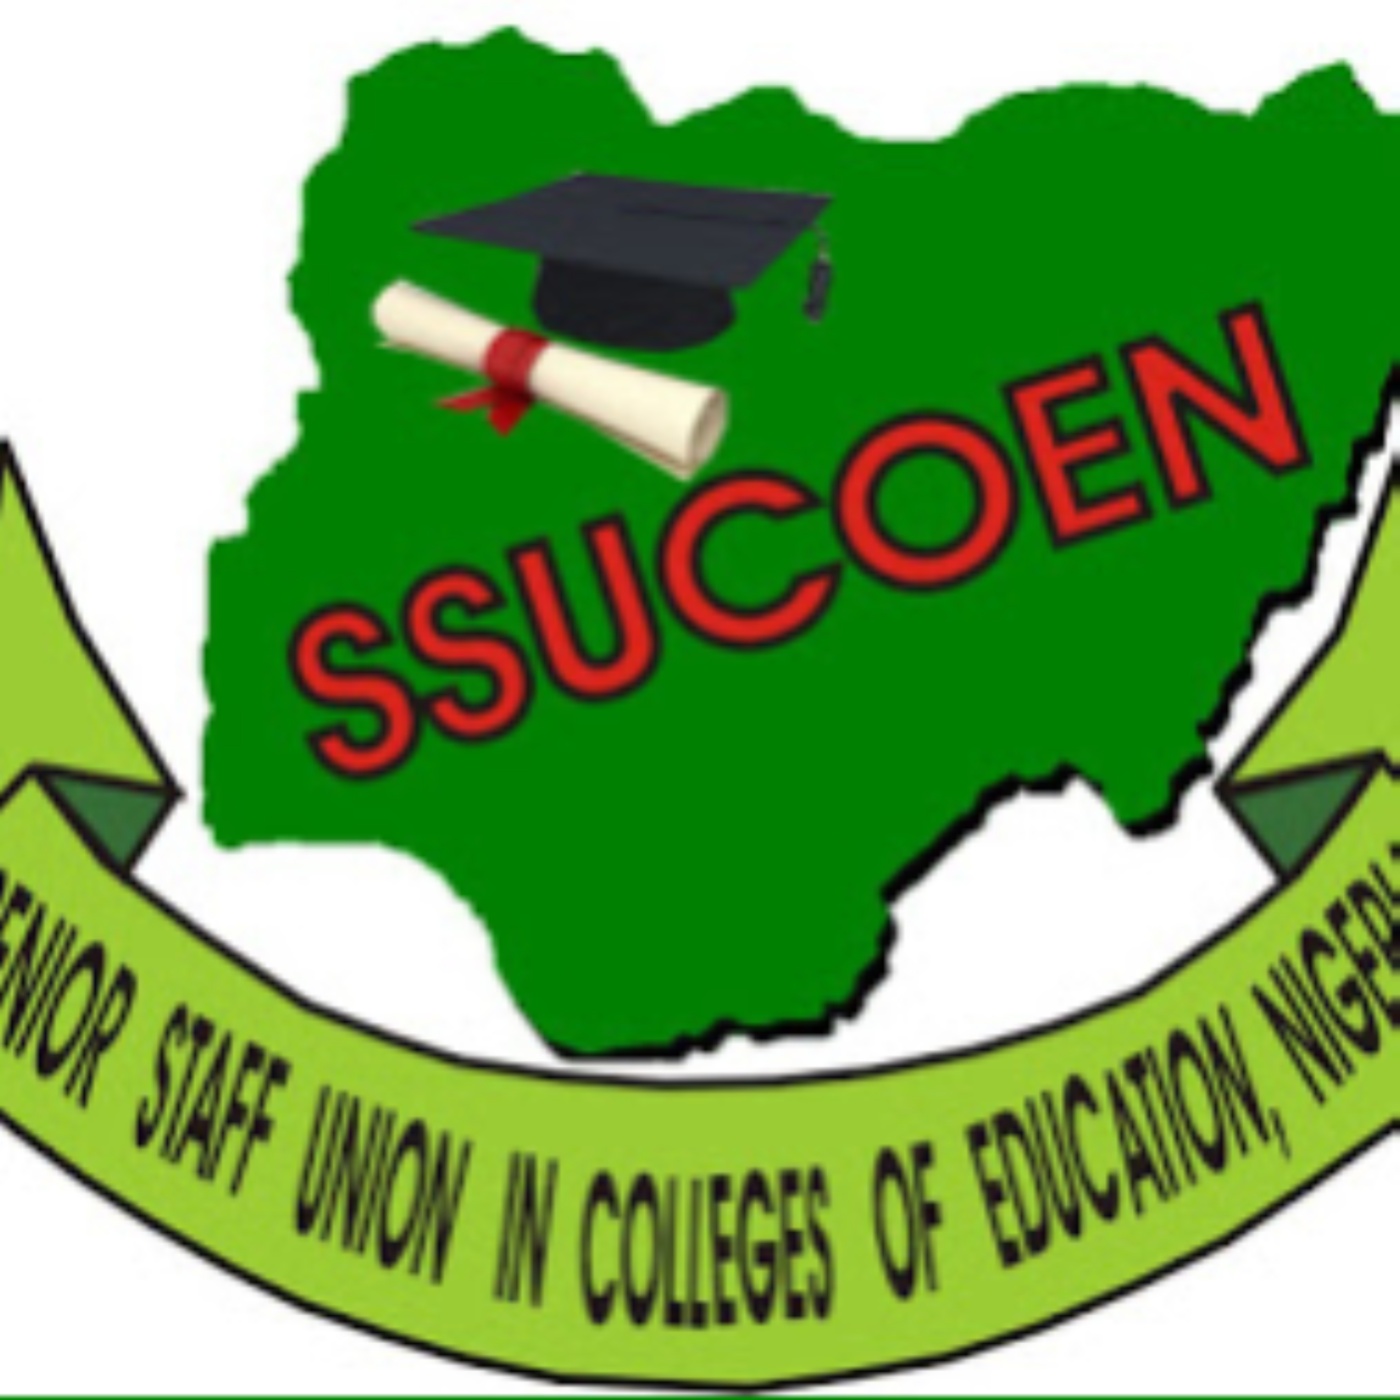 40% IGR deduction: SSUCOEN commends FG for cancelling policy